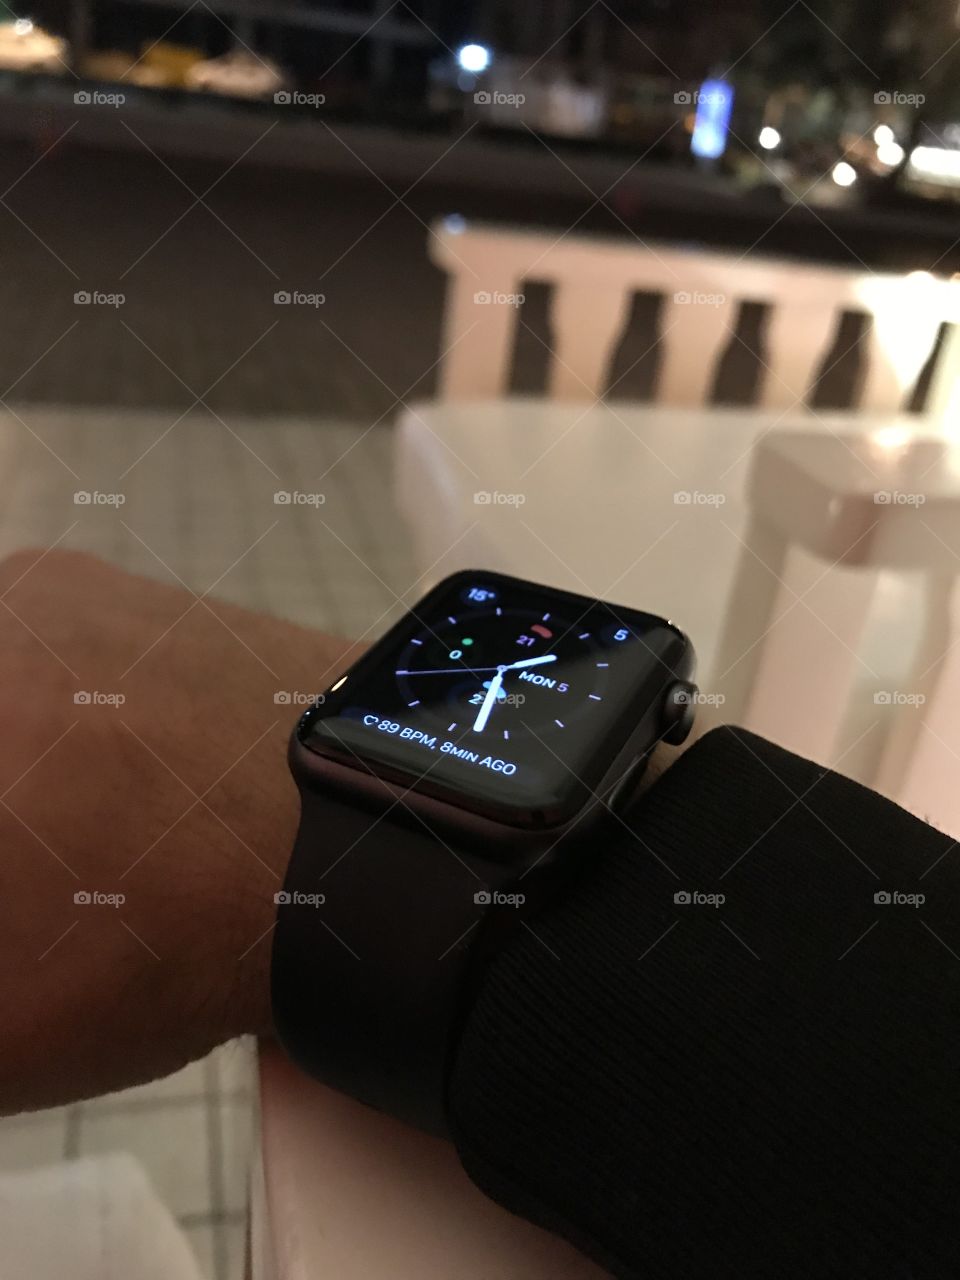 The beauty apple watch gives to your hand ⌚️